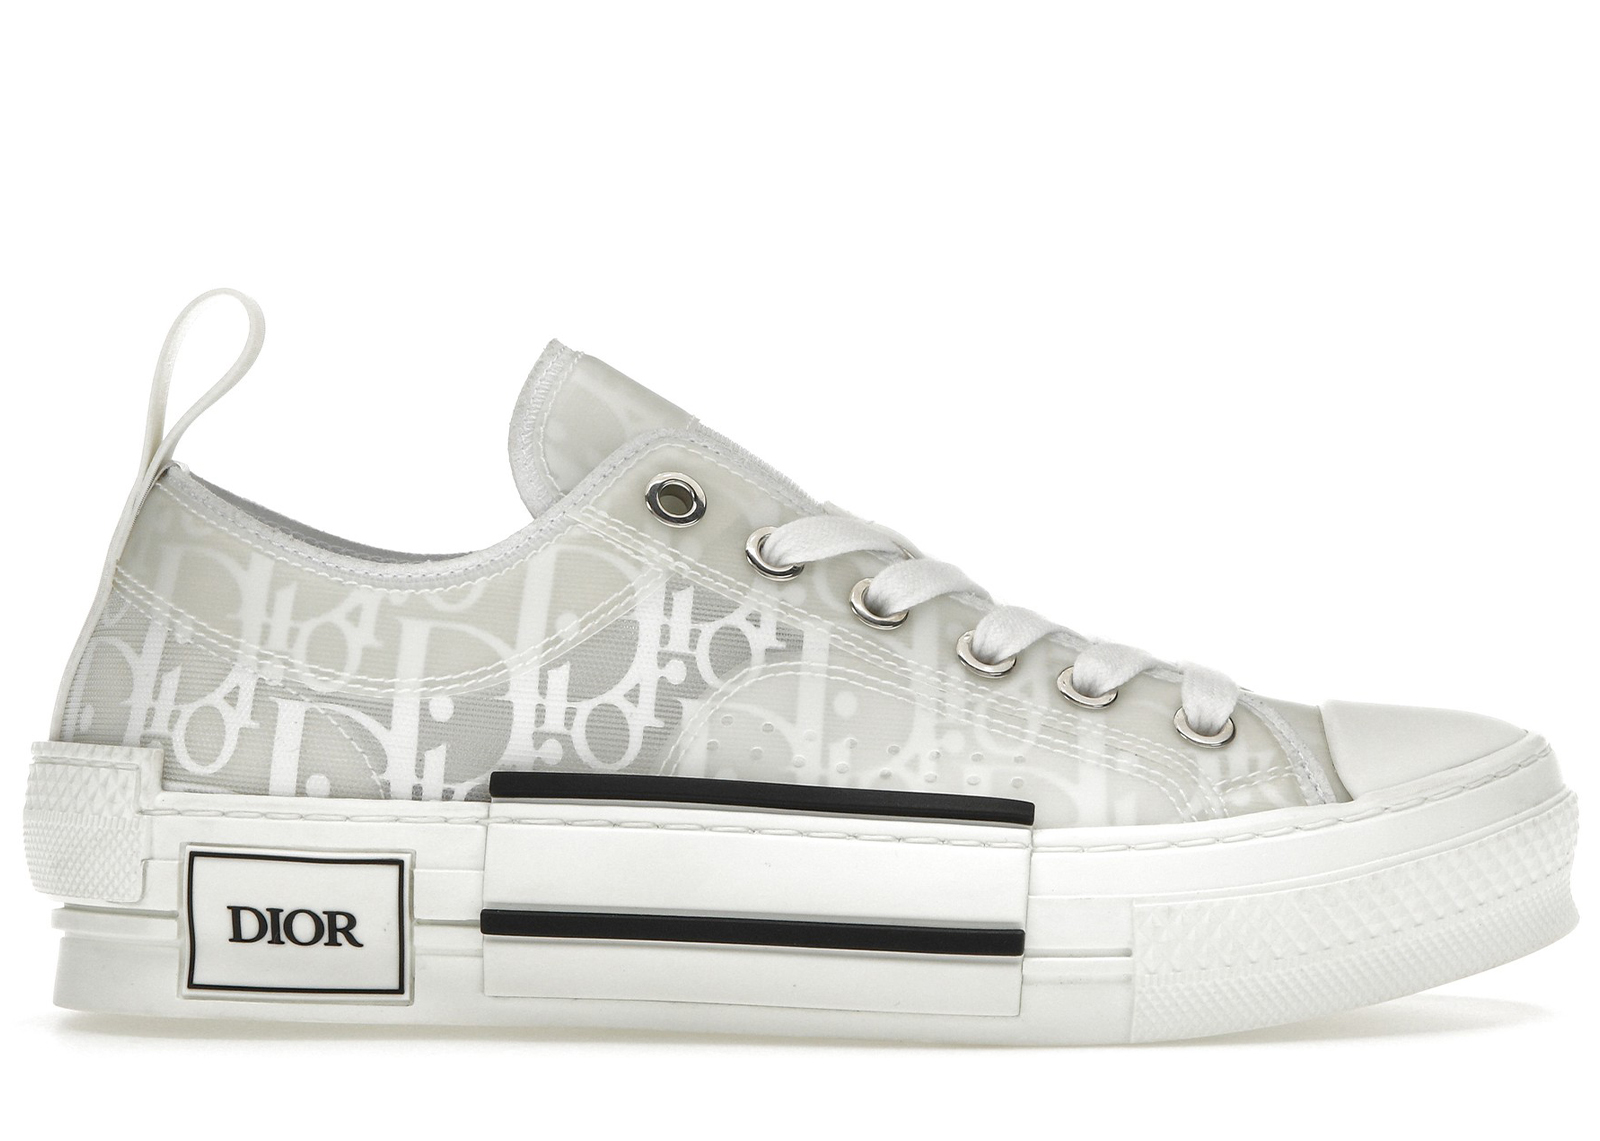 Buy Dior Shoes & New Sneakers - StockX